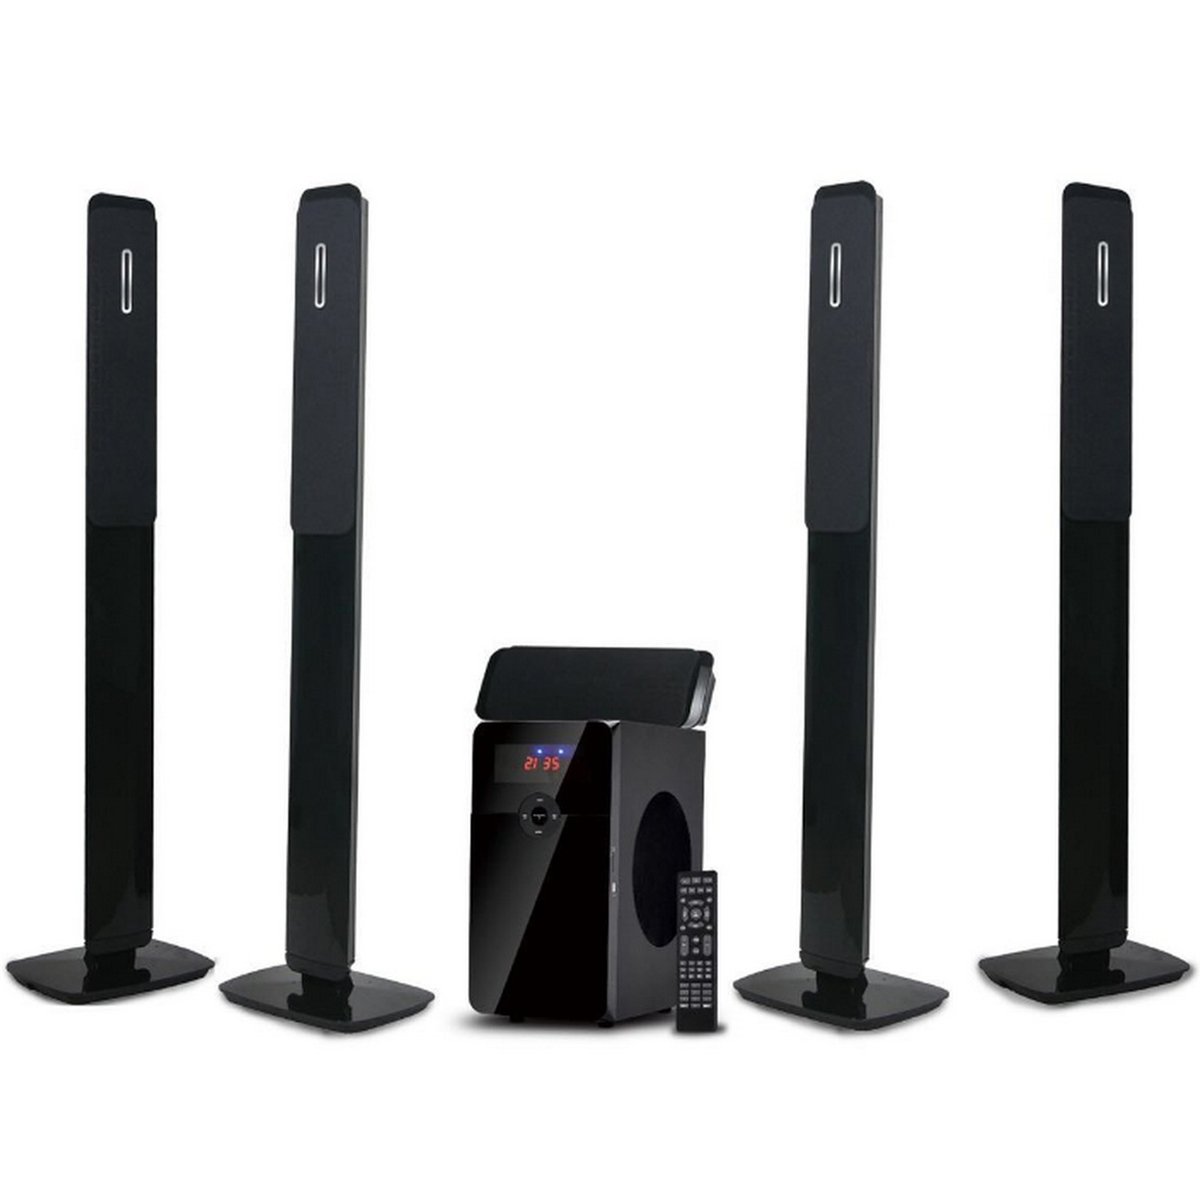 Buy Impex Home Theatre HT-5105 5.1 Channel Online at Best Price | Home Theatre | Lulu KSA in Saudi Arabia